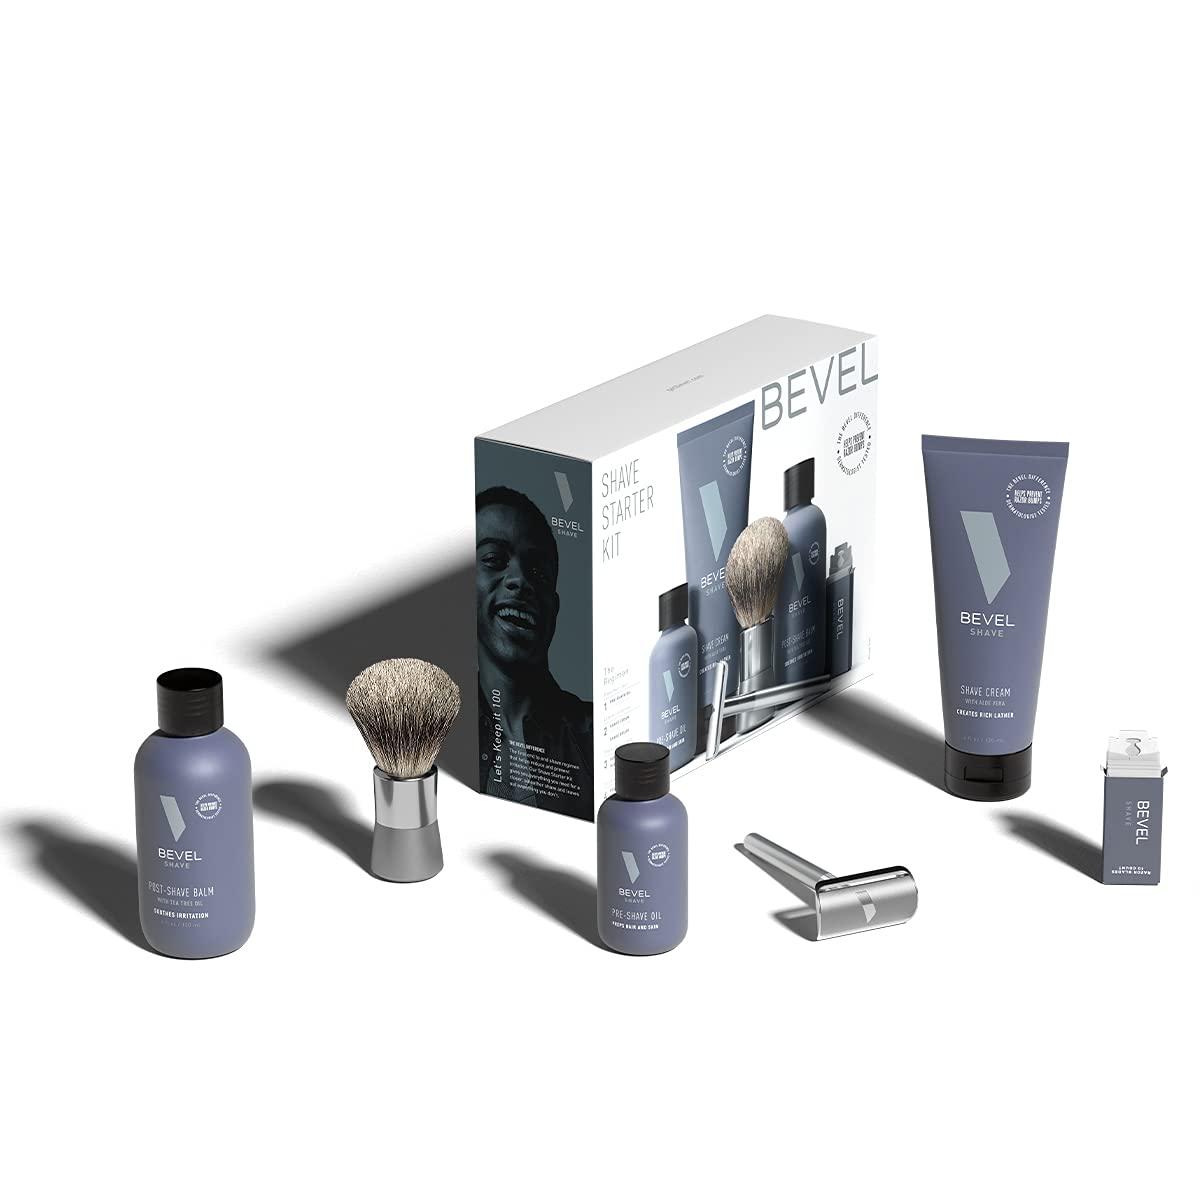 Shaving Kit for Men by Bevel - Starter Shave Kit, Includes Safety Razor,  Shaving Brush, Shave Creams, Oil, Balm and 20 Blades. Clinically Tested to Help  Prevent Razor Bumps Shave Kit (New Version)